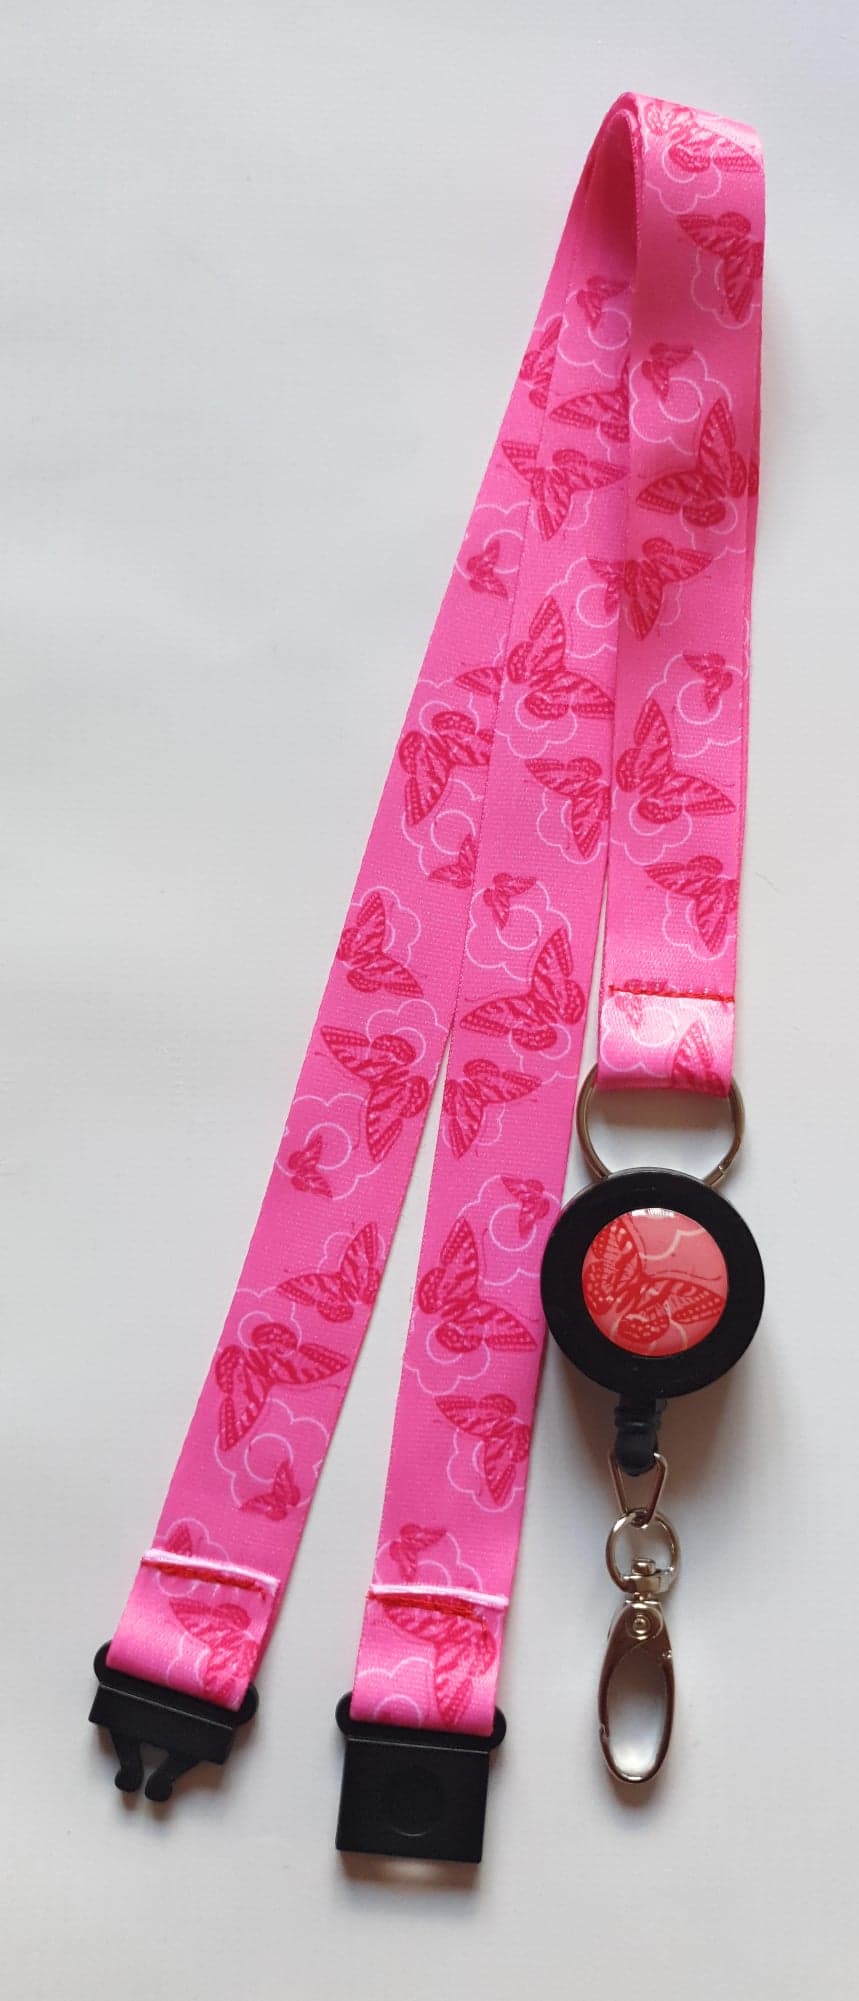 1x SpiriuS Lanyard with pink Butterflies Retractable Reel ID Badge Holder  with metal clip Keyring